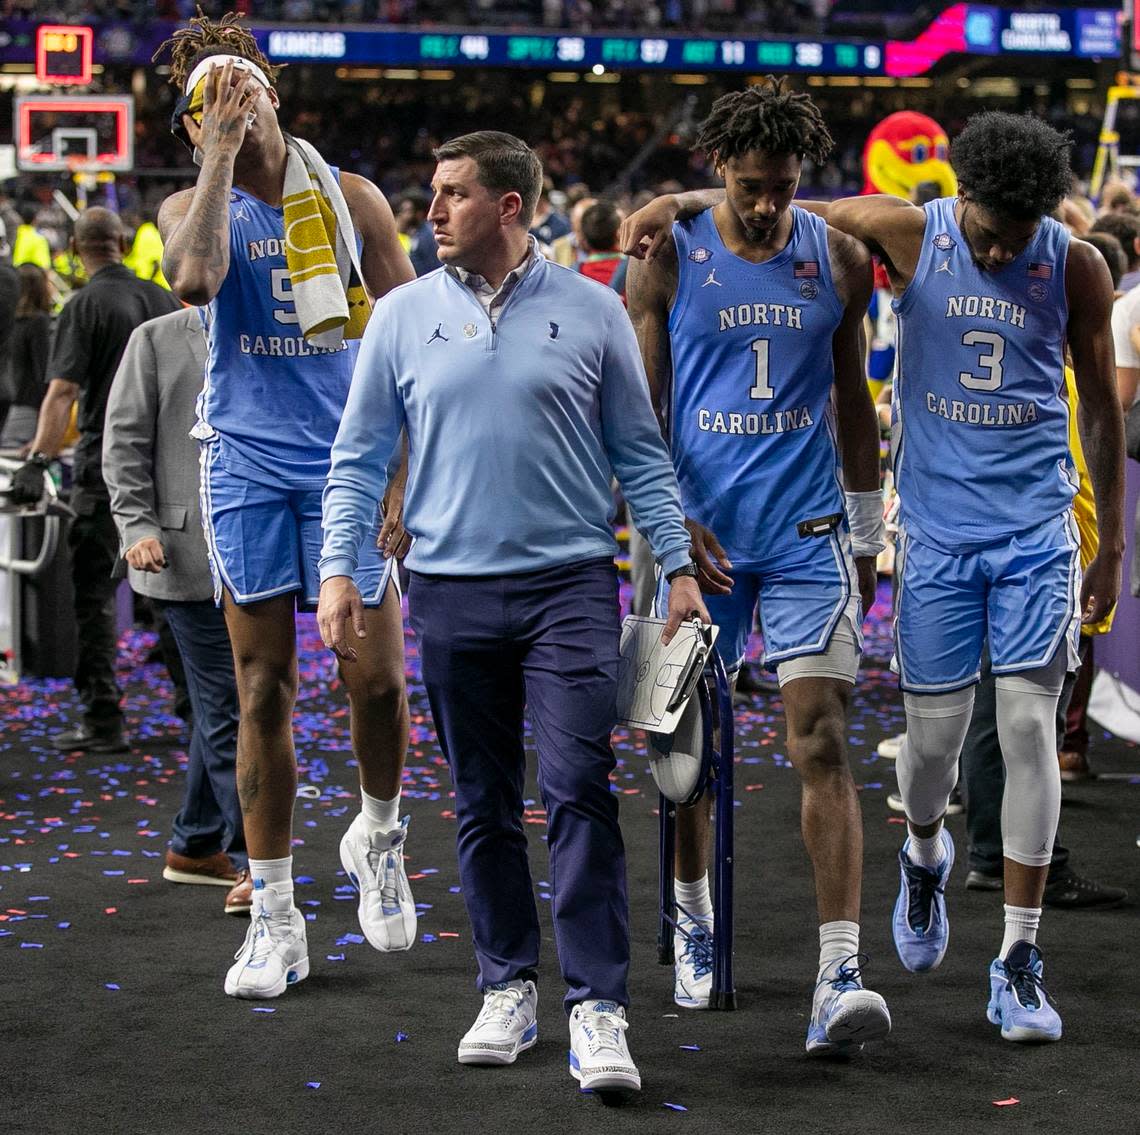 North Carolina’s Armando Bacot (5), in pain after a late game ankle injury, leaves the court with Eric Hoots, Leaky Black (1) and Dontrez Styles (3) following the the Tar Heels’ 72-69 loss to Kansas in the NCAA Championship game on Monday, April 4, 2022 at Caesars Superdome in New Orleans, La.